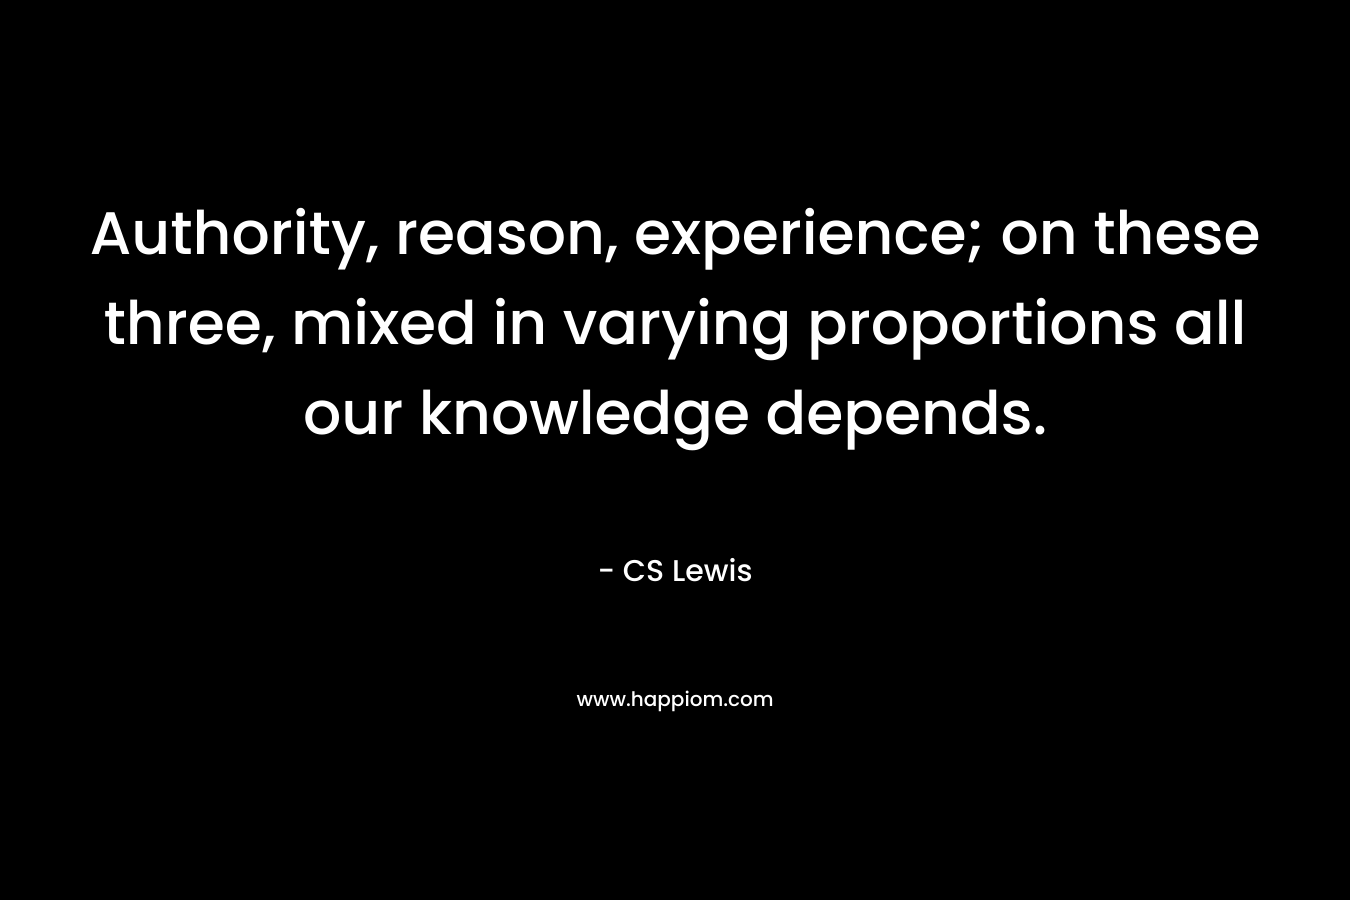 Authority, reason, experience; on these three, mixed in varying proportions all our knowledge depends.